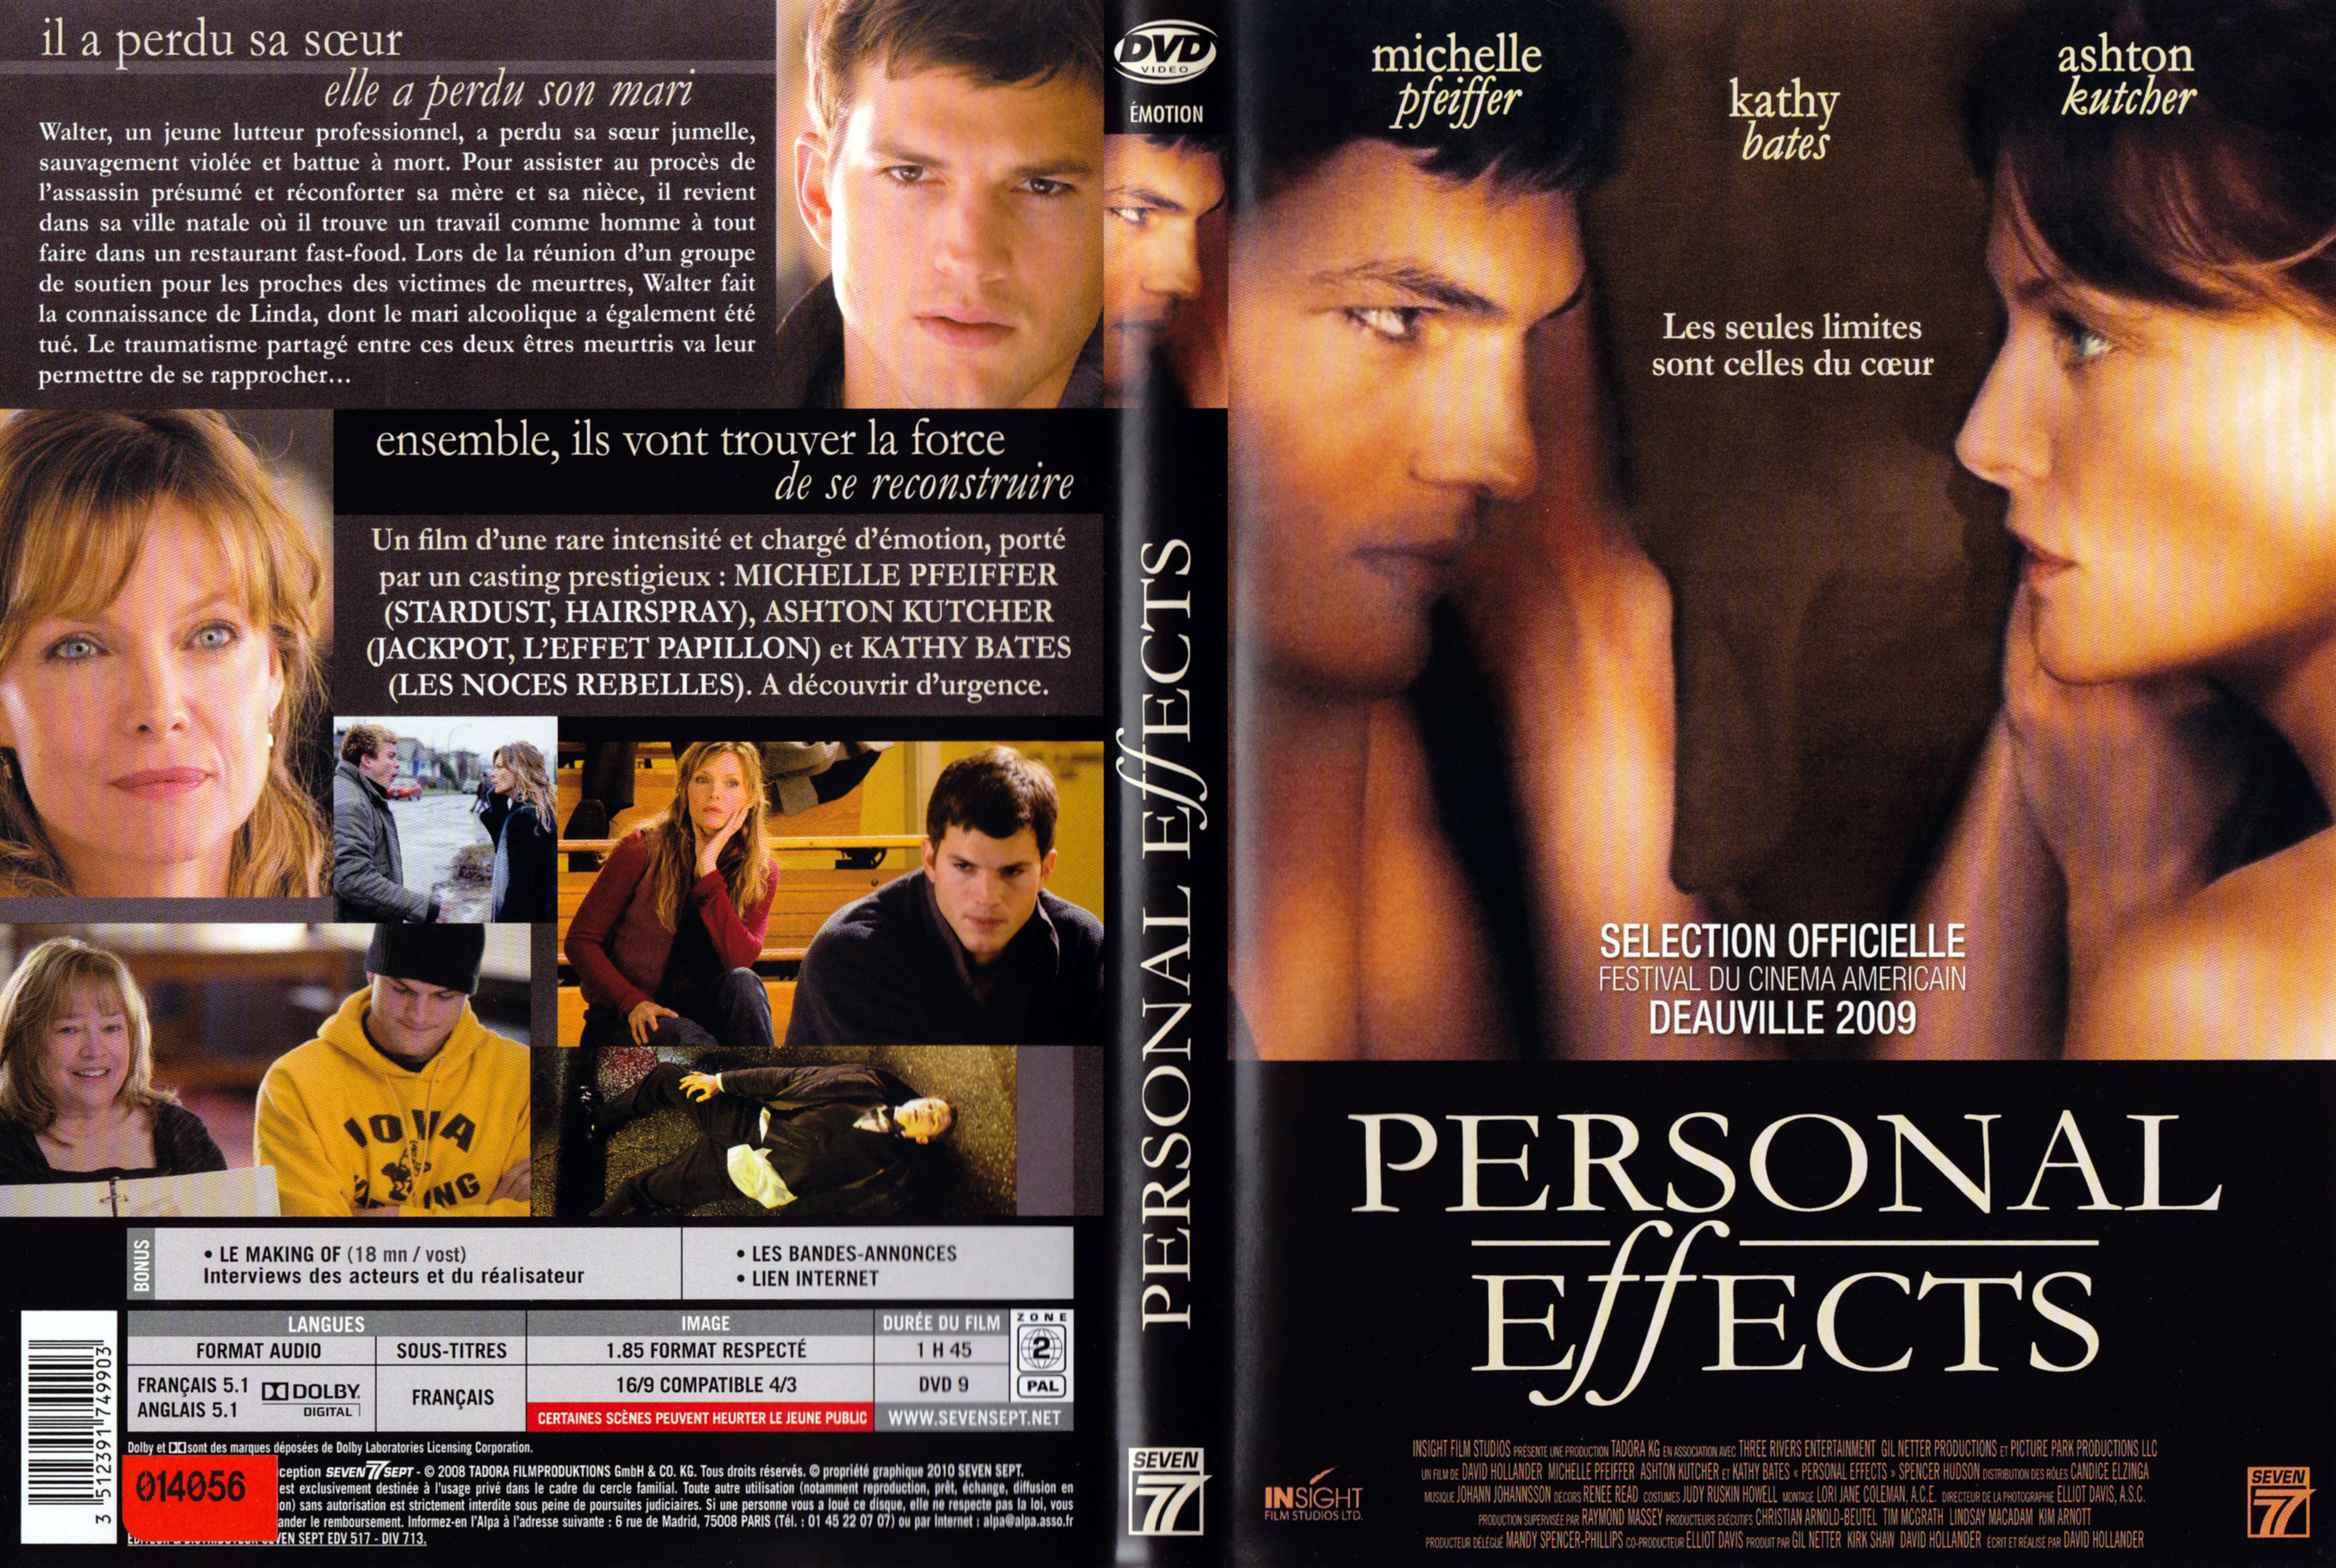 Jaquette DVD Personal effects